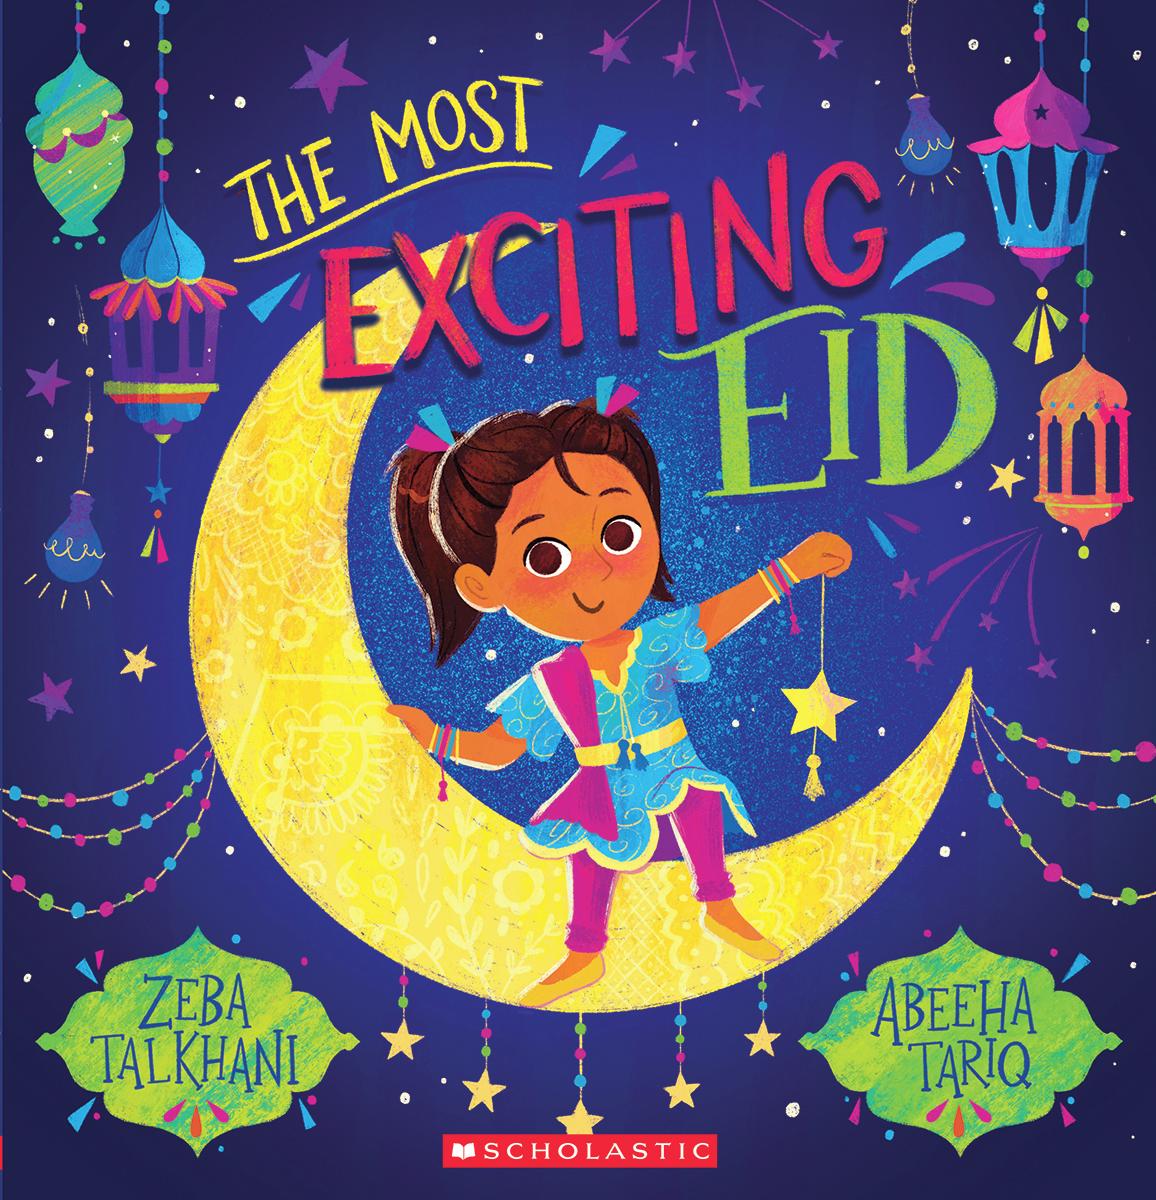 The Most Exciting Eid - 